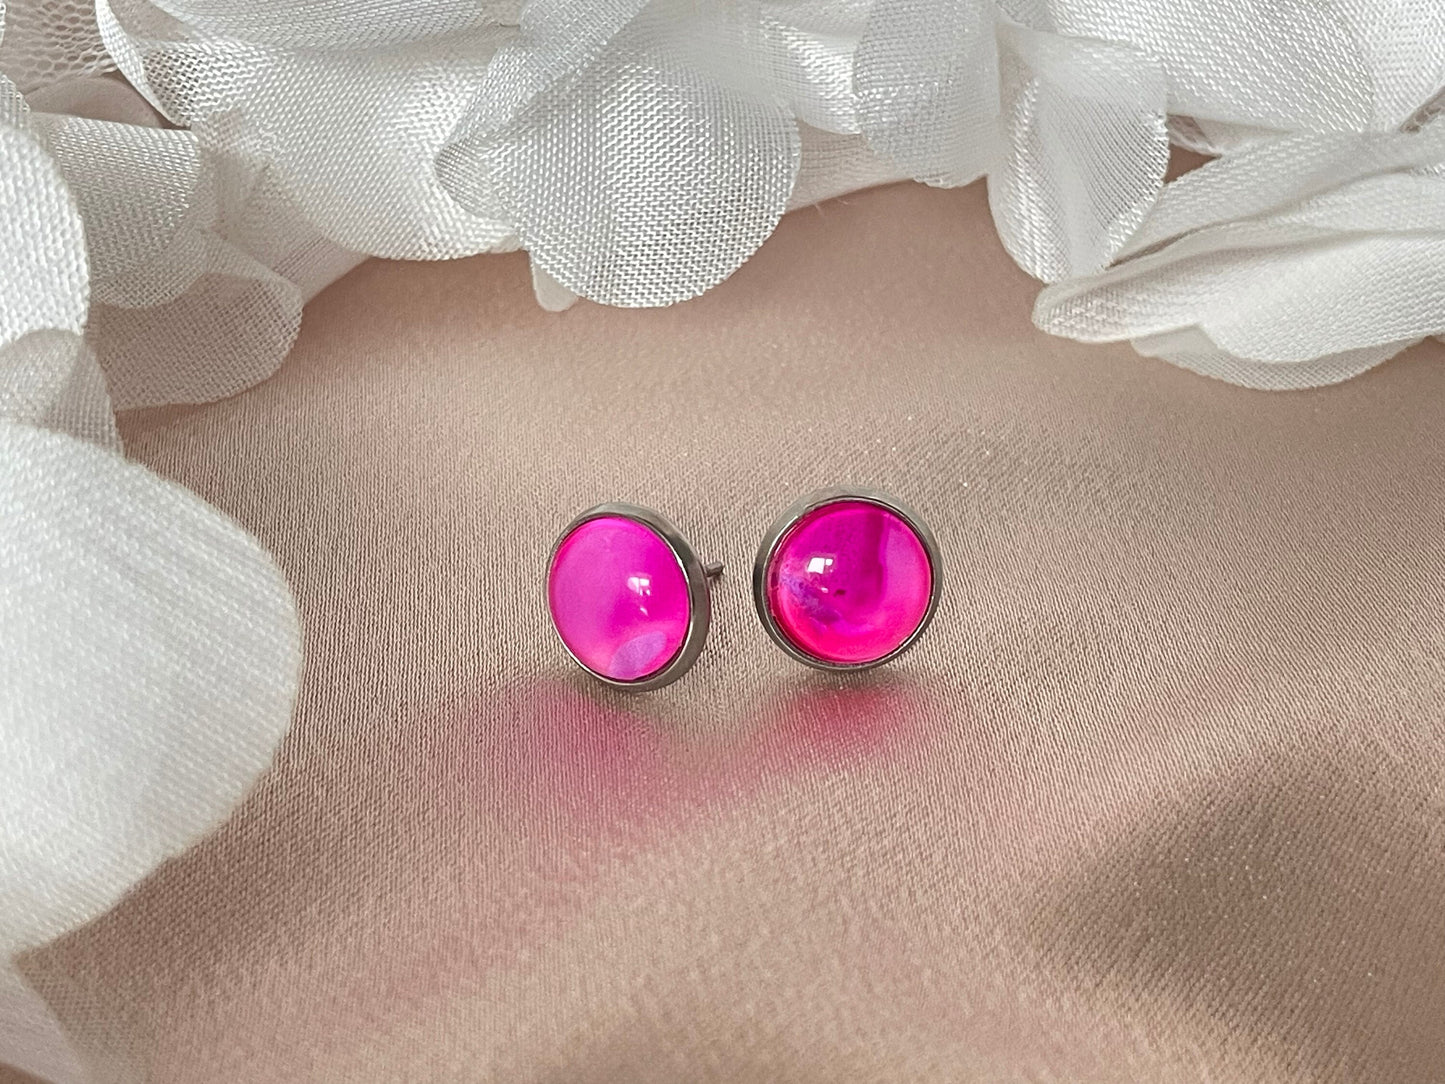 Hand Painted Stud Earrings in Pink Acrylic Art Pour Paint with Glass Cabochons